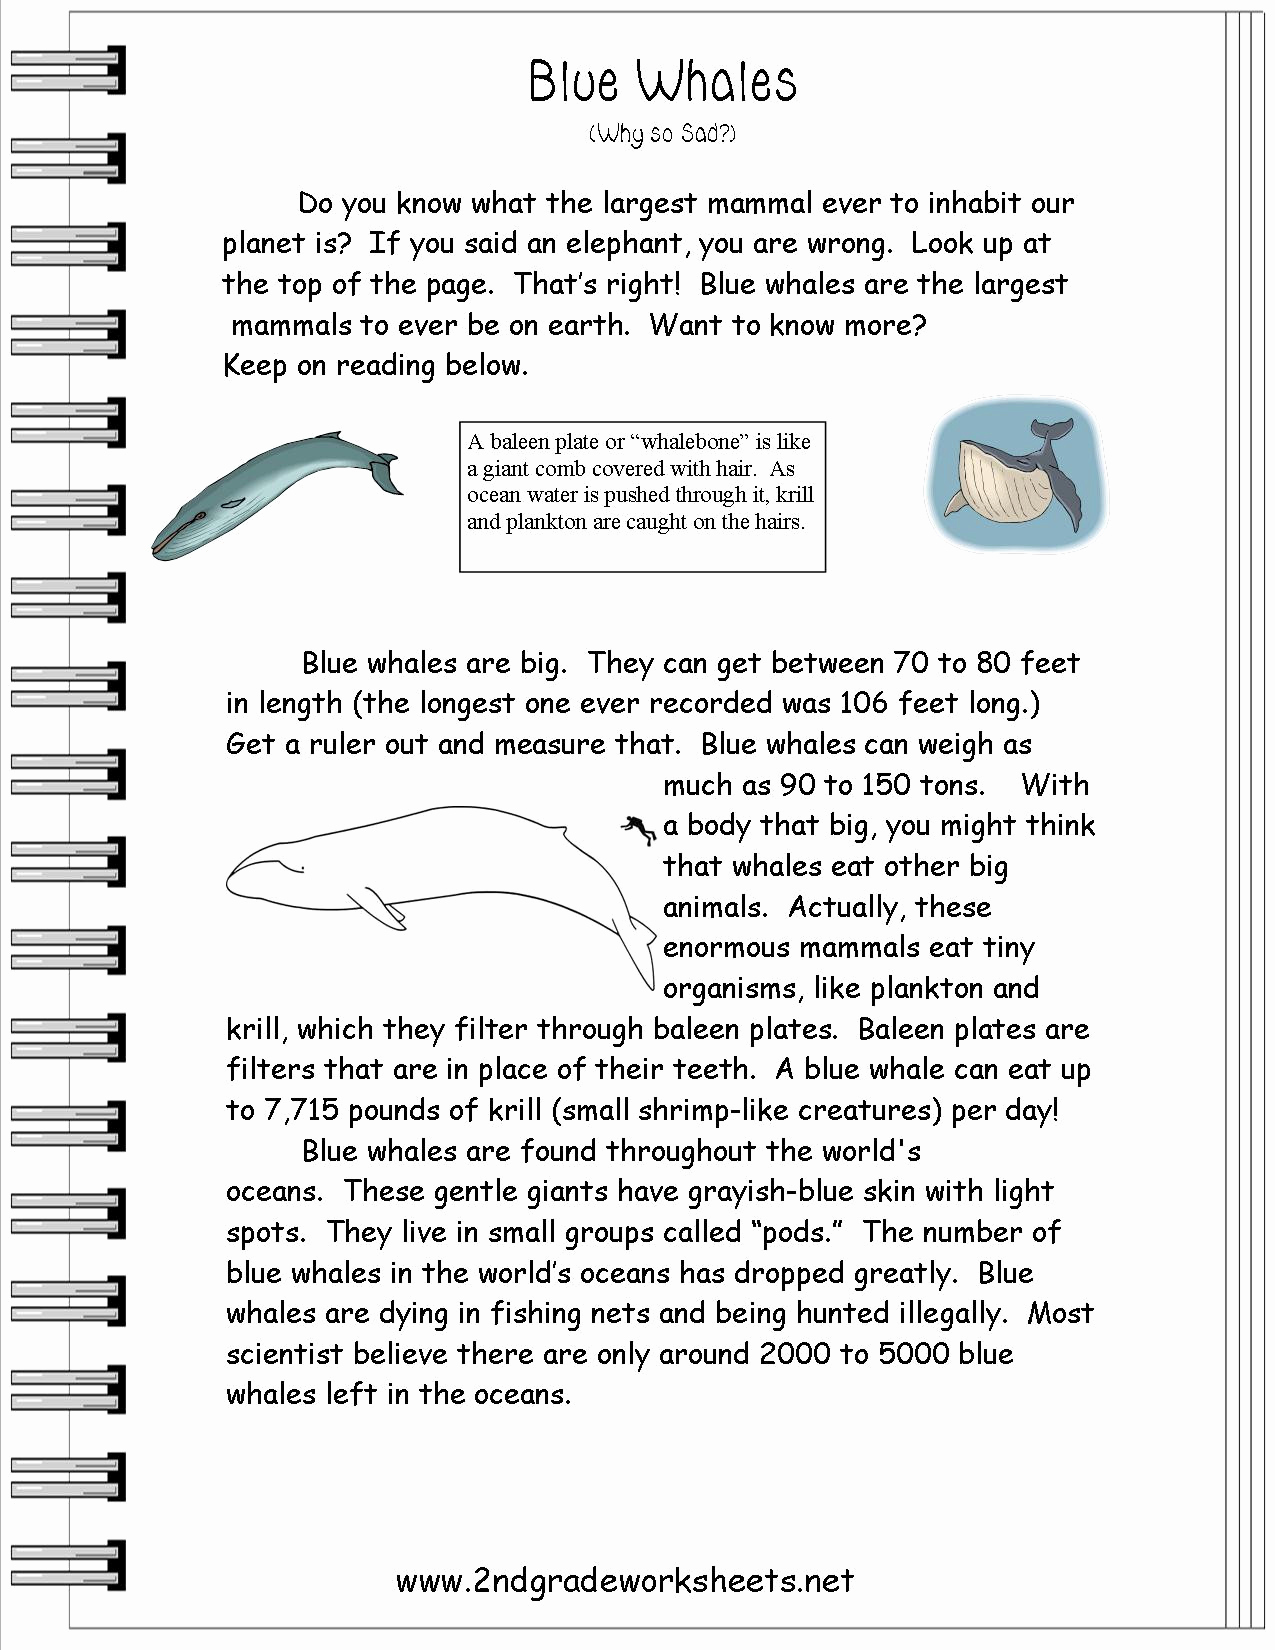 Sequence Worksheets 3rd Grade Inspirational 20 Sequence Worksheets 3rd Grade